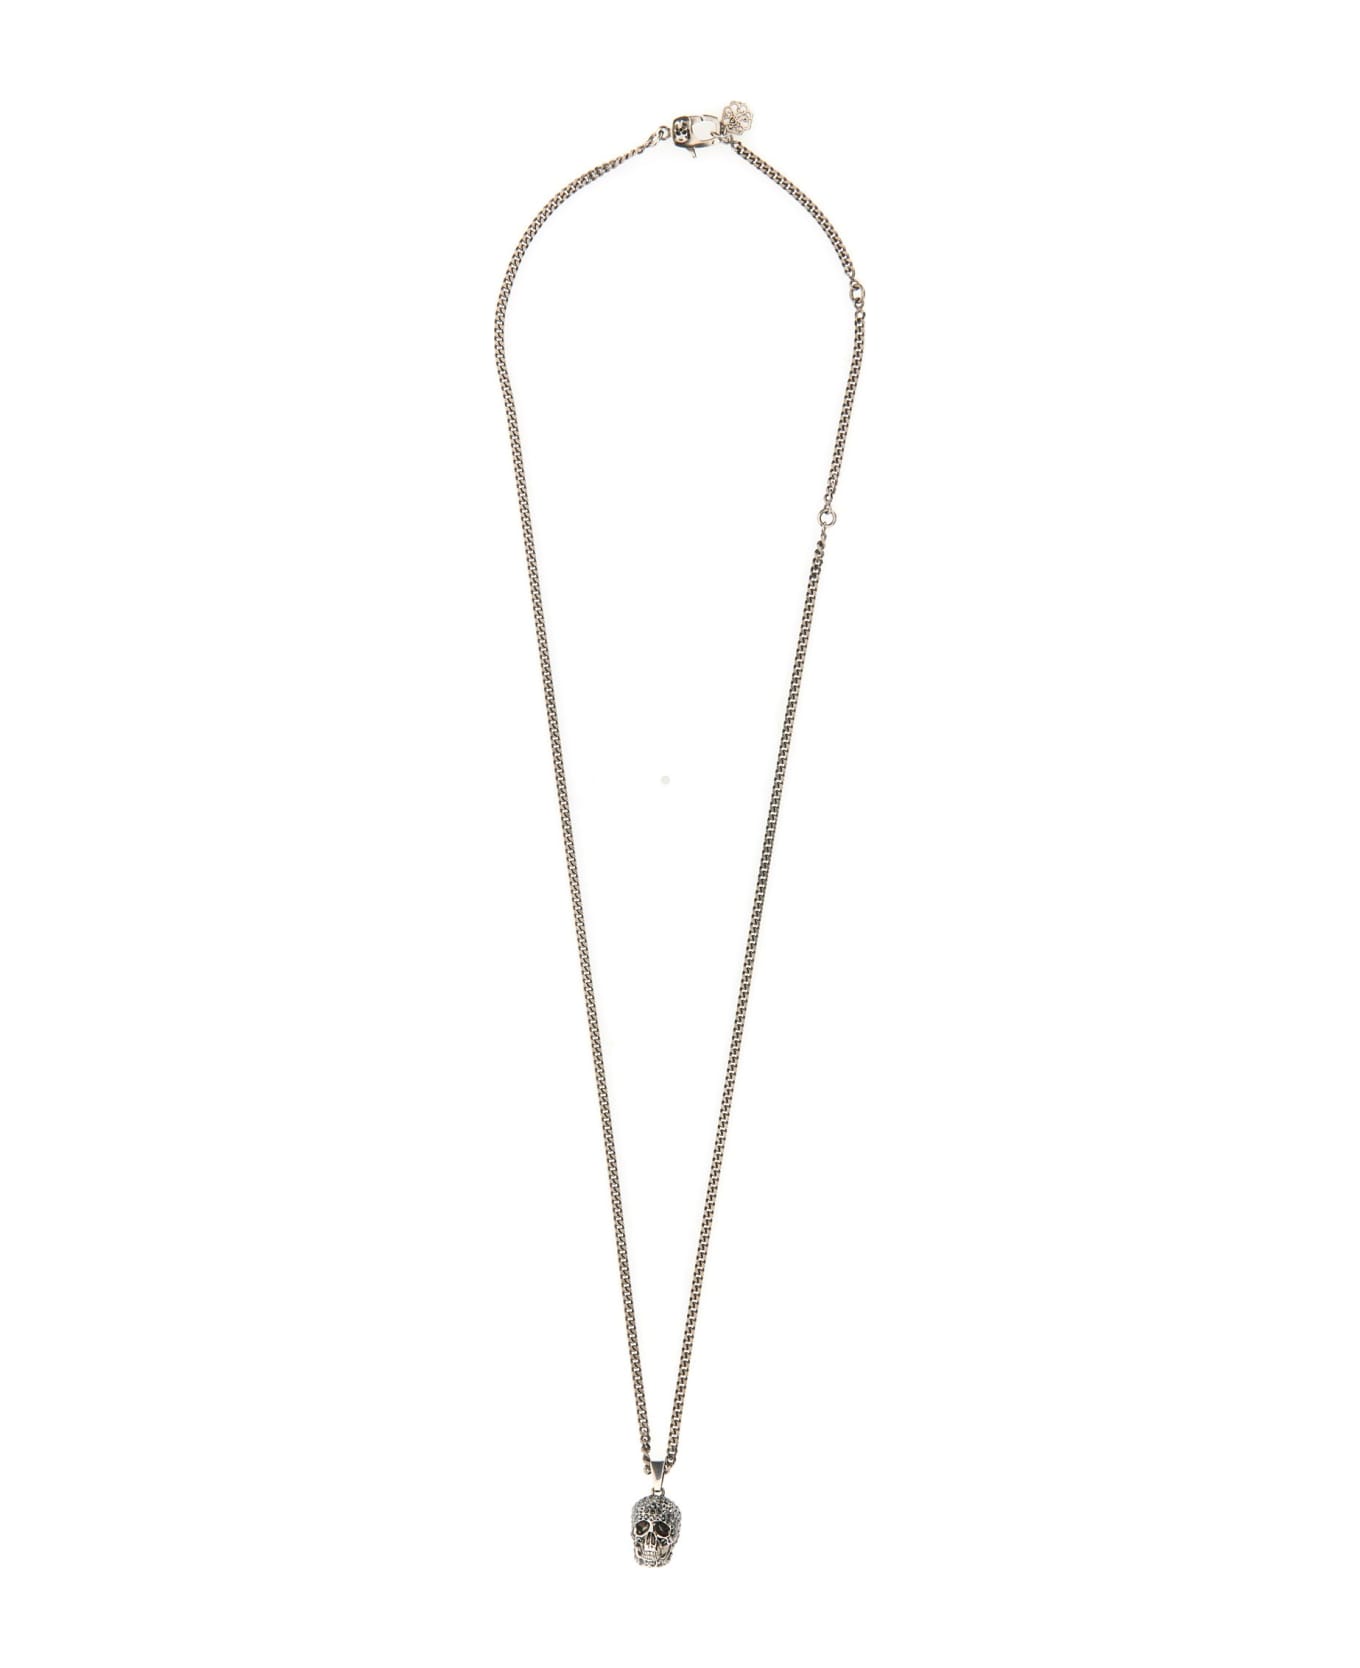 Alexander McQueen Pave` Skull Necklace - Silver ネックレス